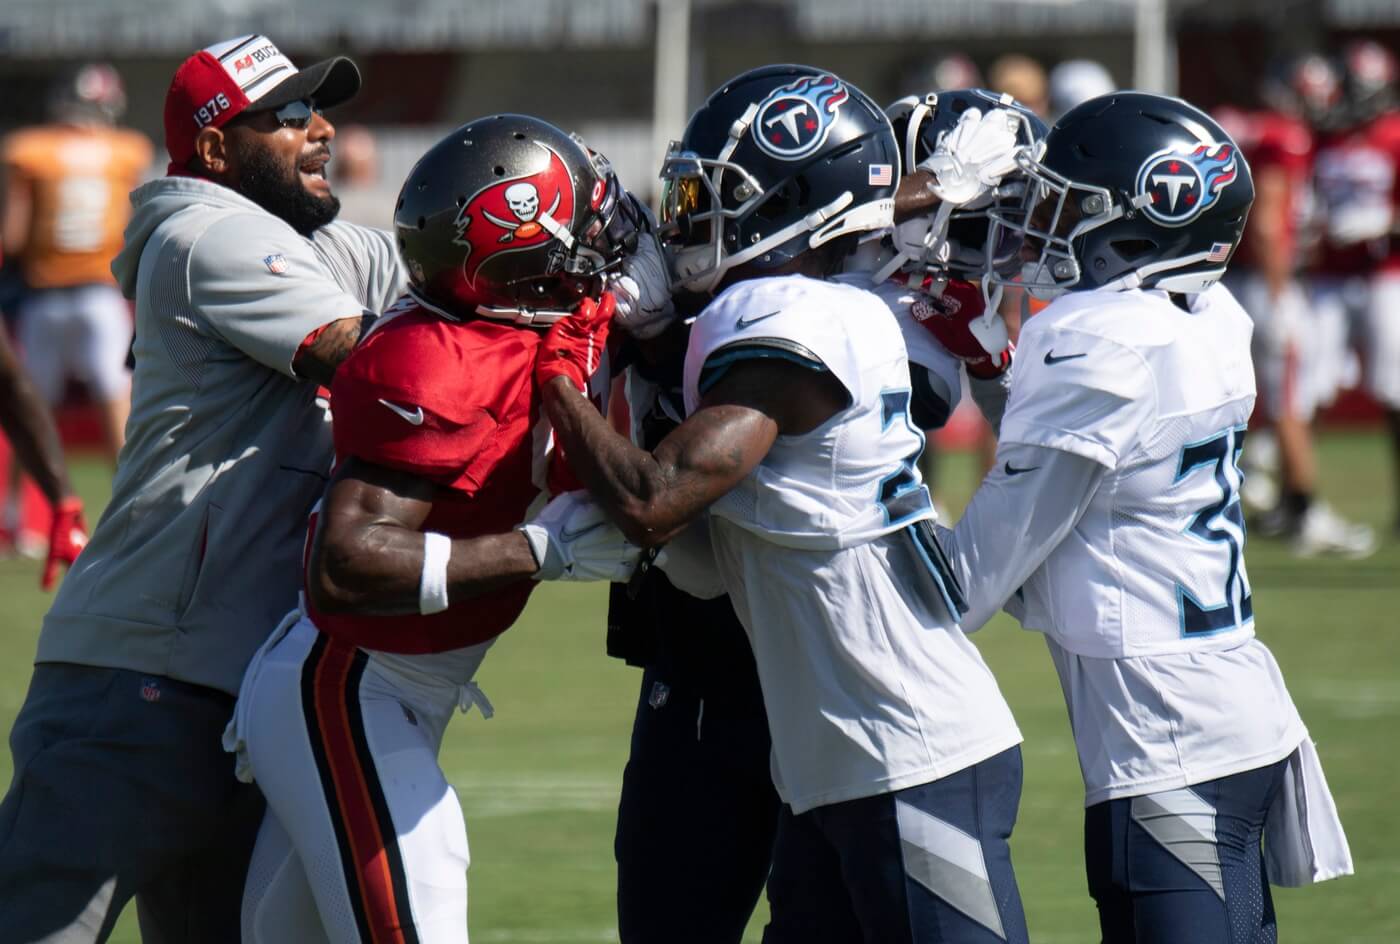 Tampa Bay Buccaneers wide receiver Antonio Brown (81) fights with Tennessee Titans defensive back Chris Jackson (35) during a joint training camp practice at AdventHealth Training Center Thursday, Aug. 19, 2021 in Tampa, Fla. Nas Titans Bucs 006